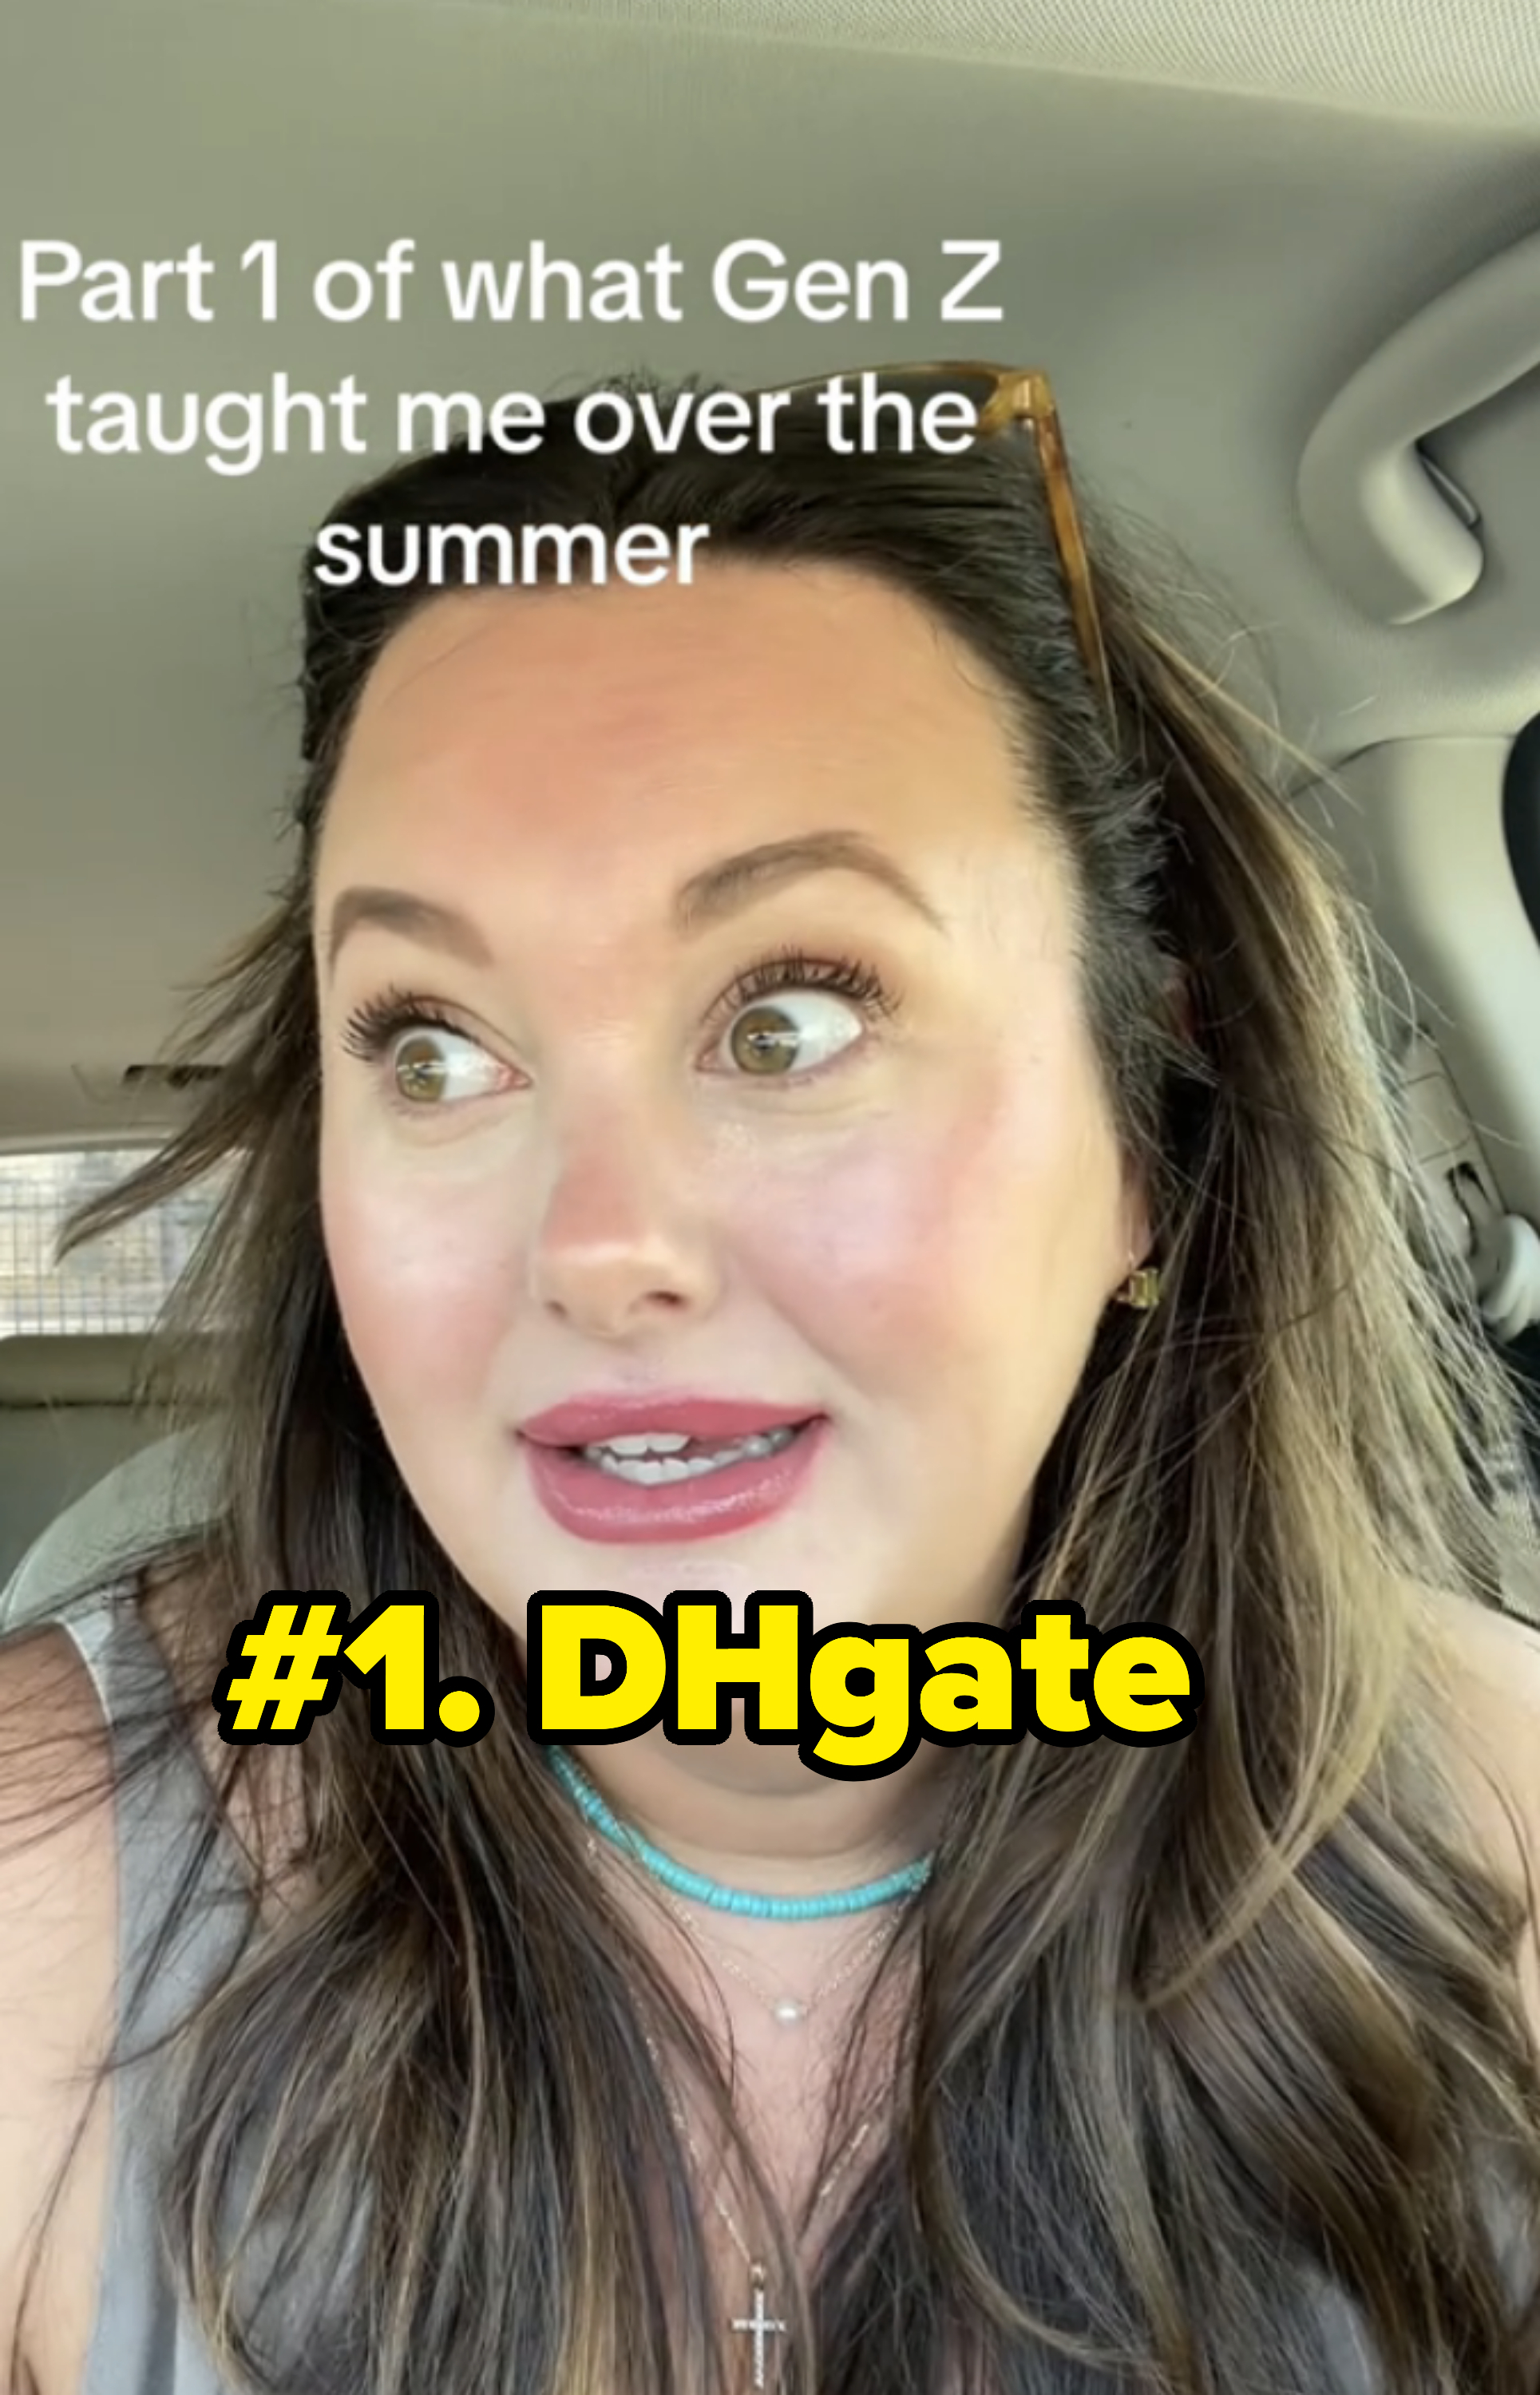 Bailey talking about DHgate